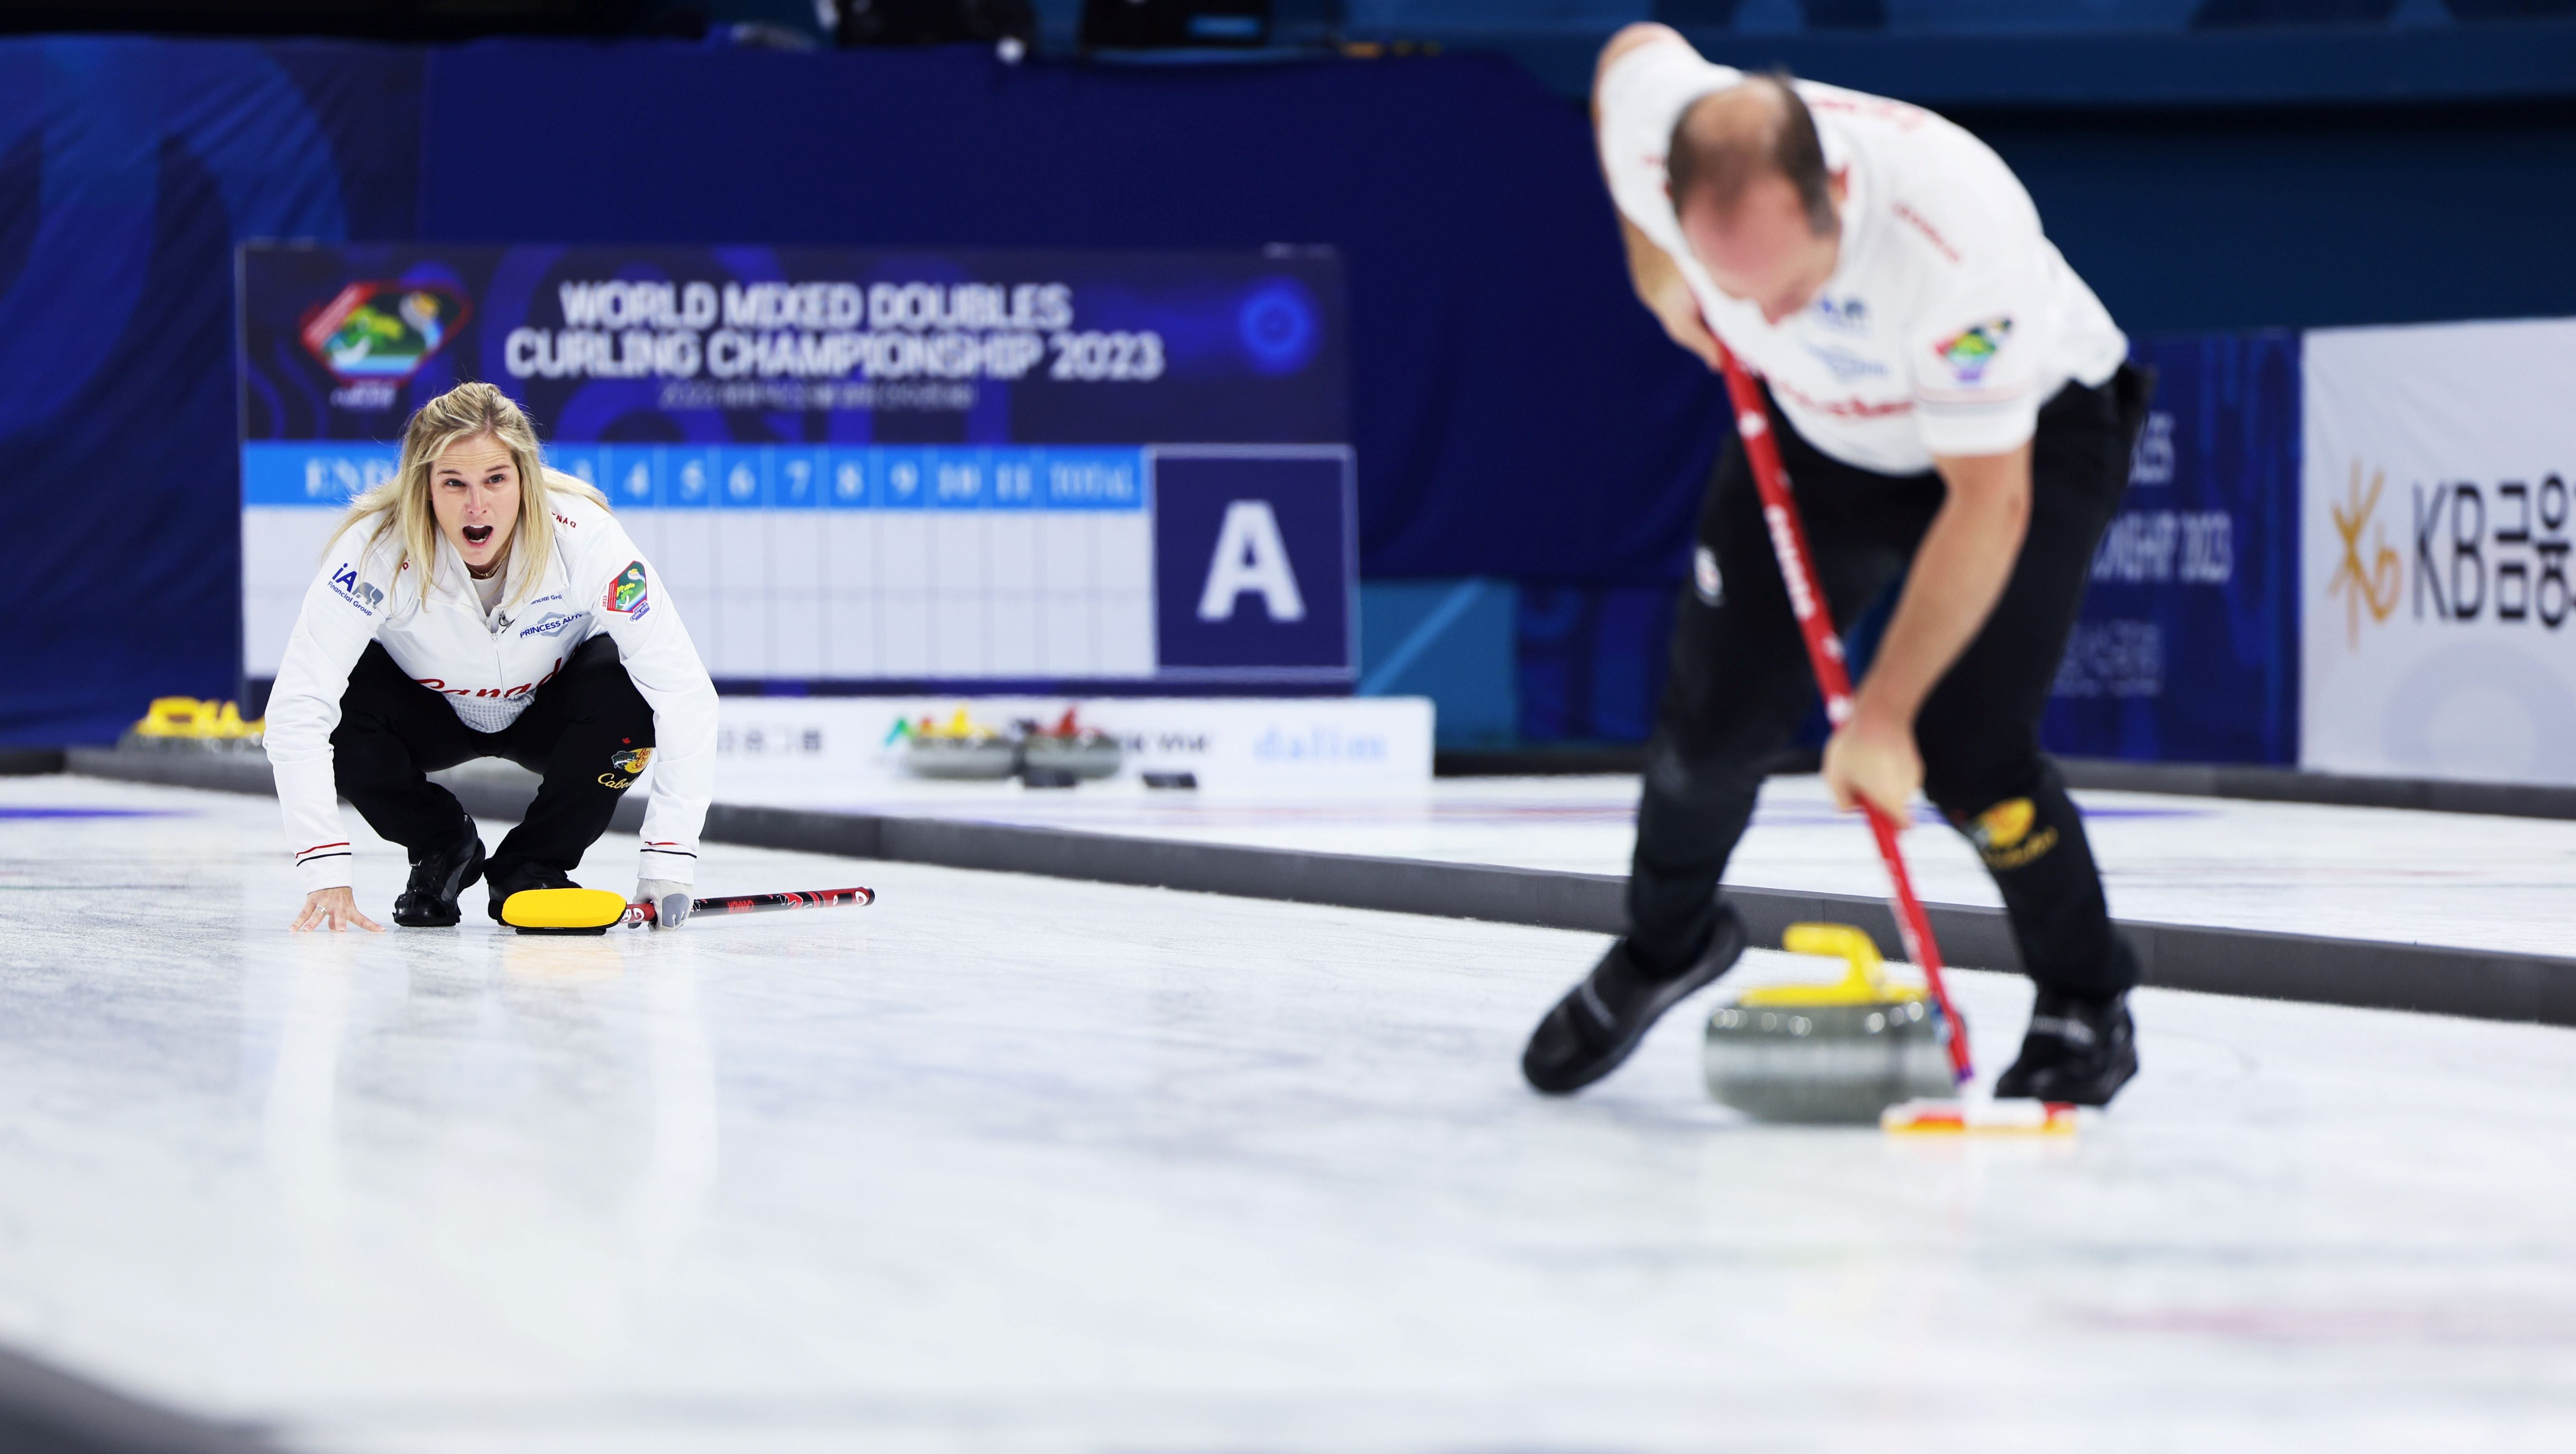 Jones and Laing to play for bronze at mixed doubles curling worlds - Team Canada